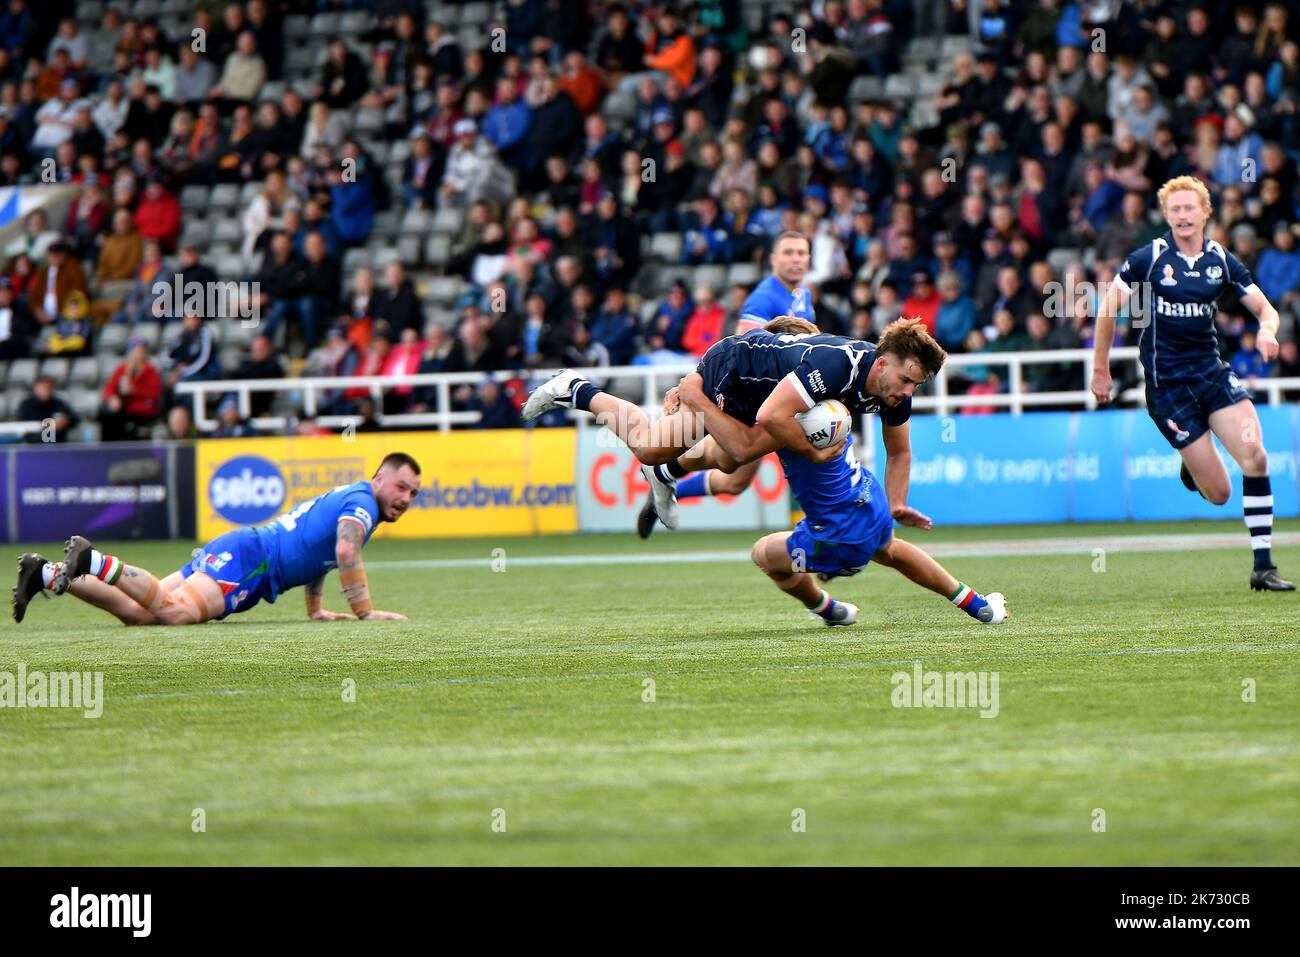 Newcastle, UK. 16th Oct 2022. 6/10/2022 RLWC2021, Scotland v Italy, Kingston Park, Newcastle, Scotland fought hard for a try after Italy won the game 4-28, Uk Credit: Robert Chambers/Alamy Live News Stock Photo